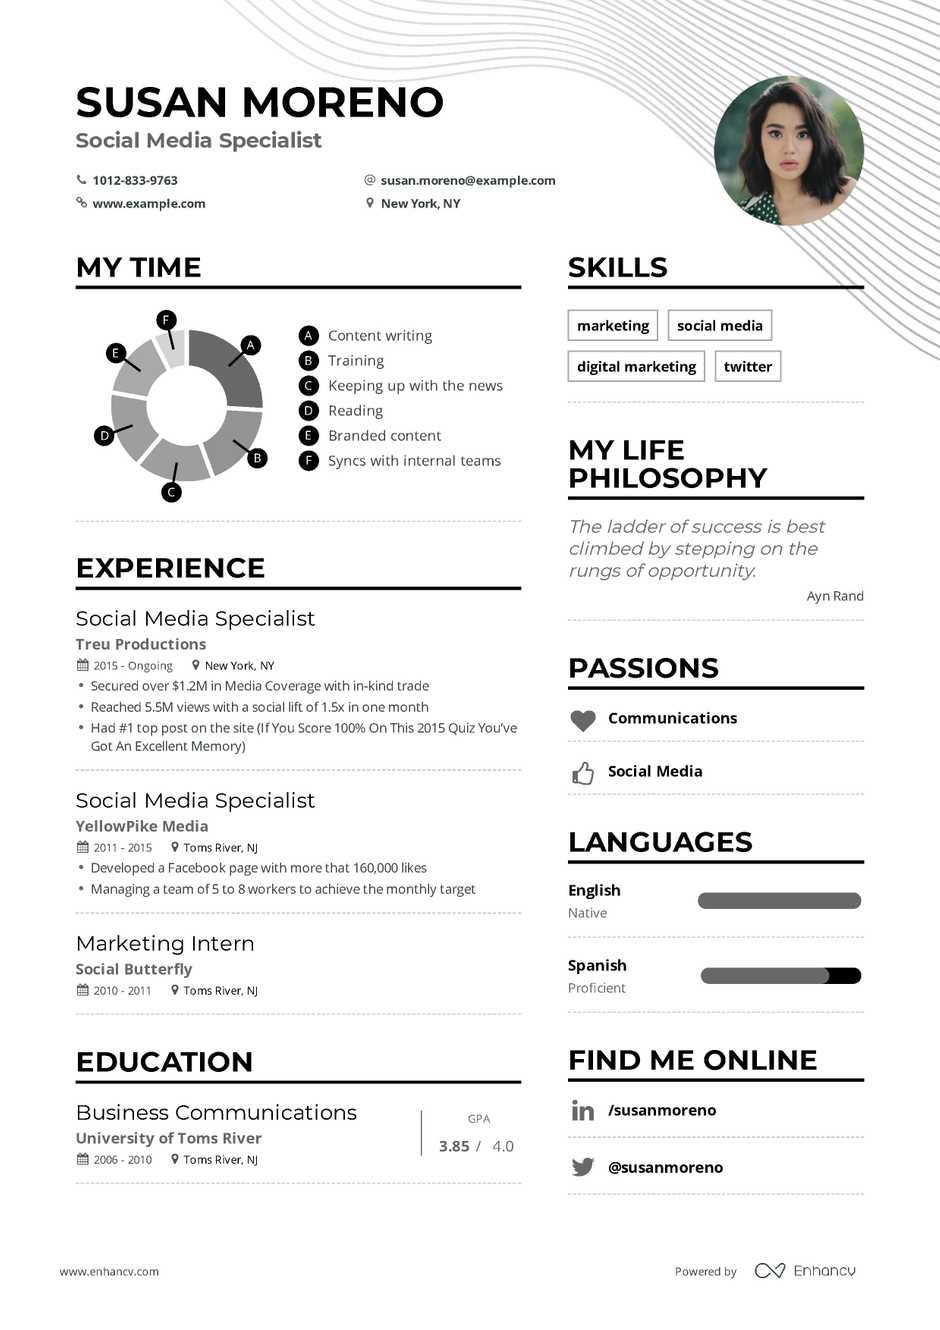 social media specialist resume example and guide for 2019